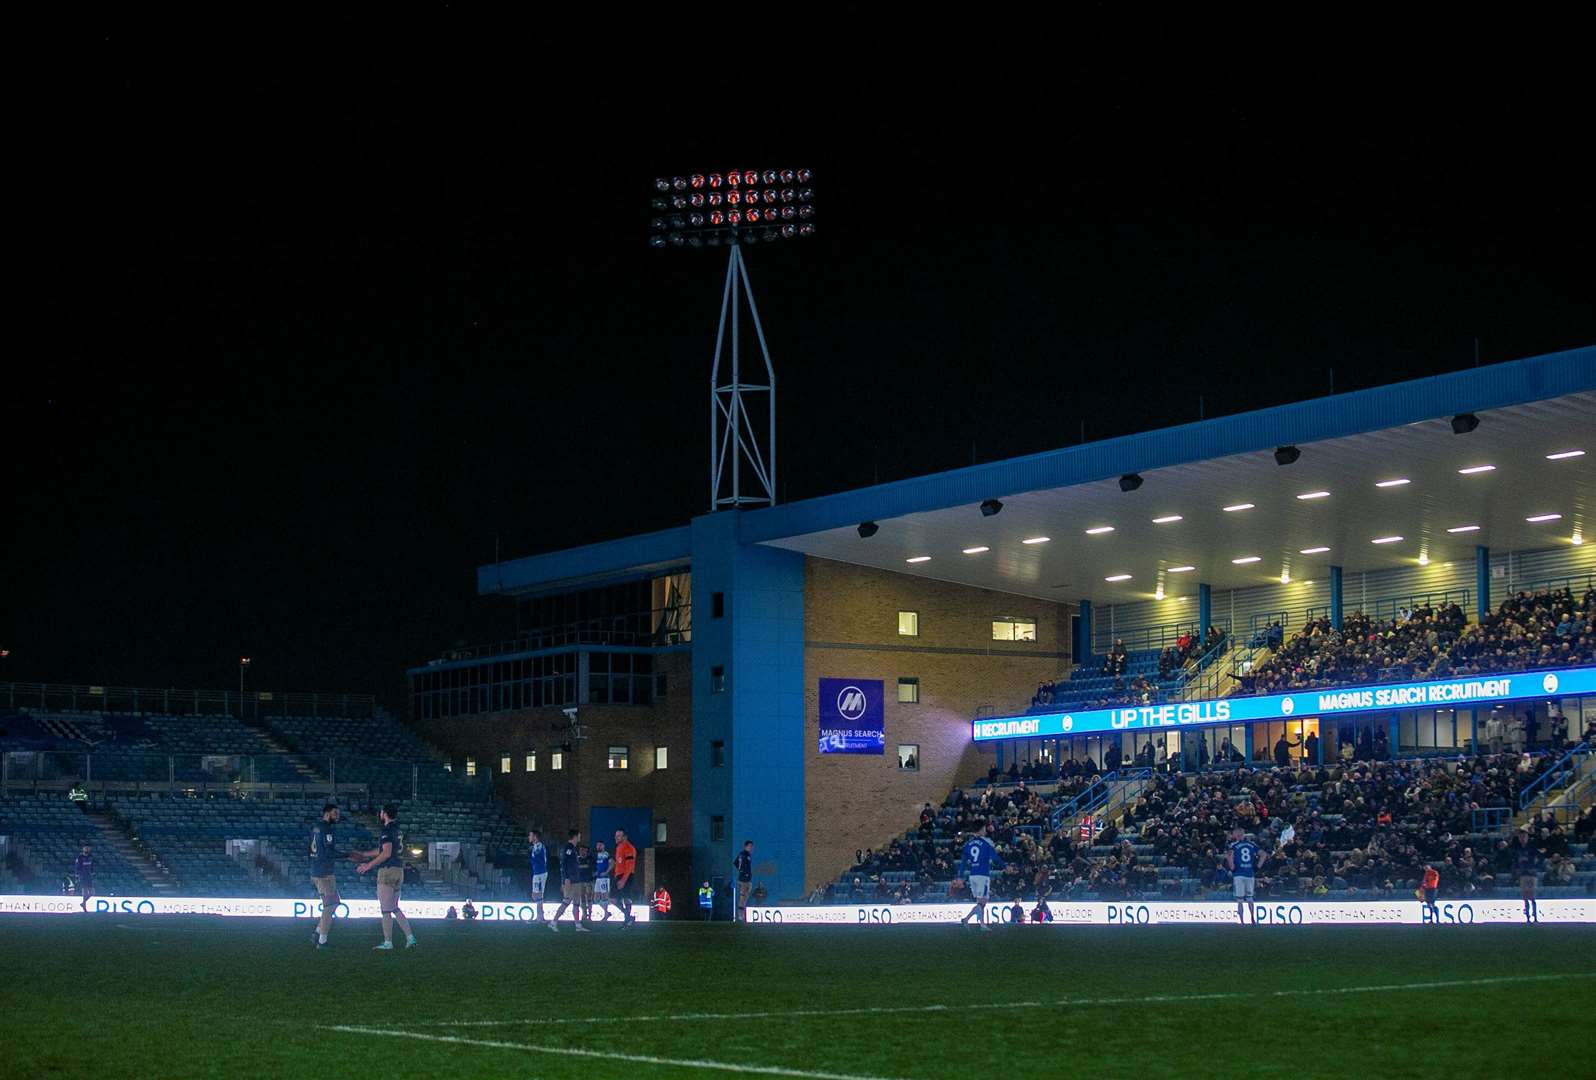 The Priestfield lights went out with just over an hour gone Picture: @Julian_KPI